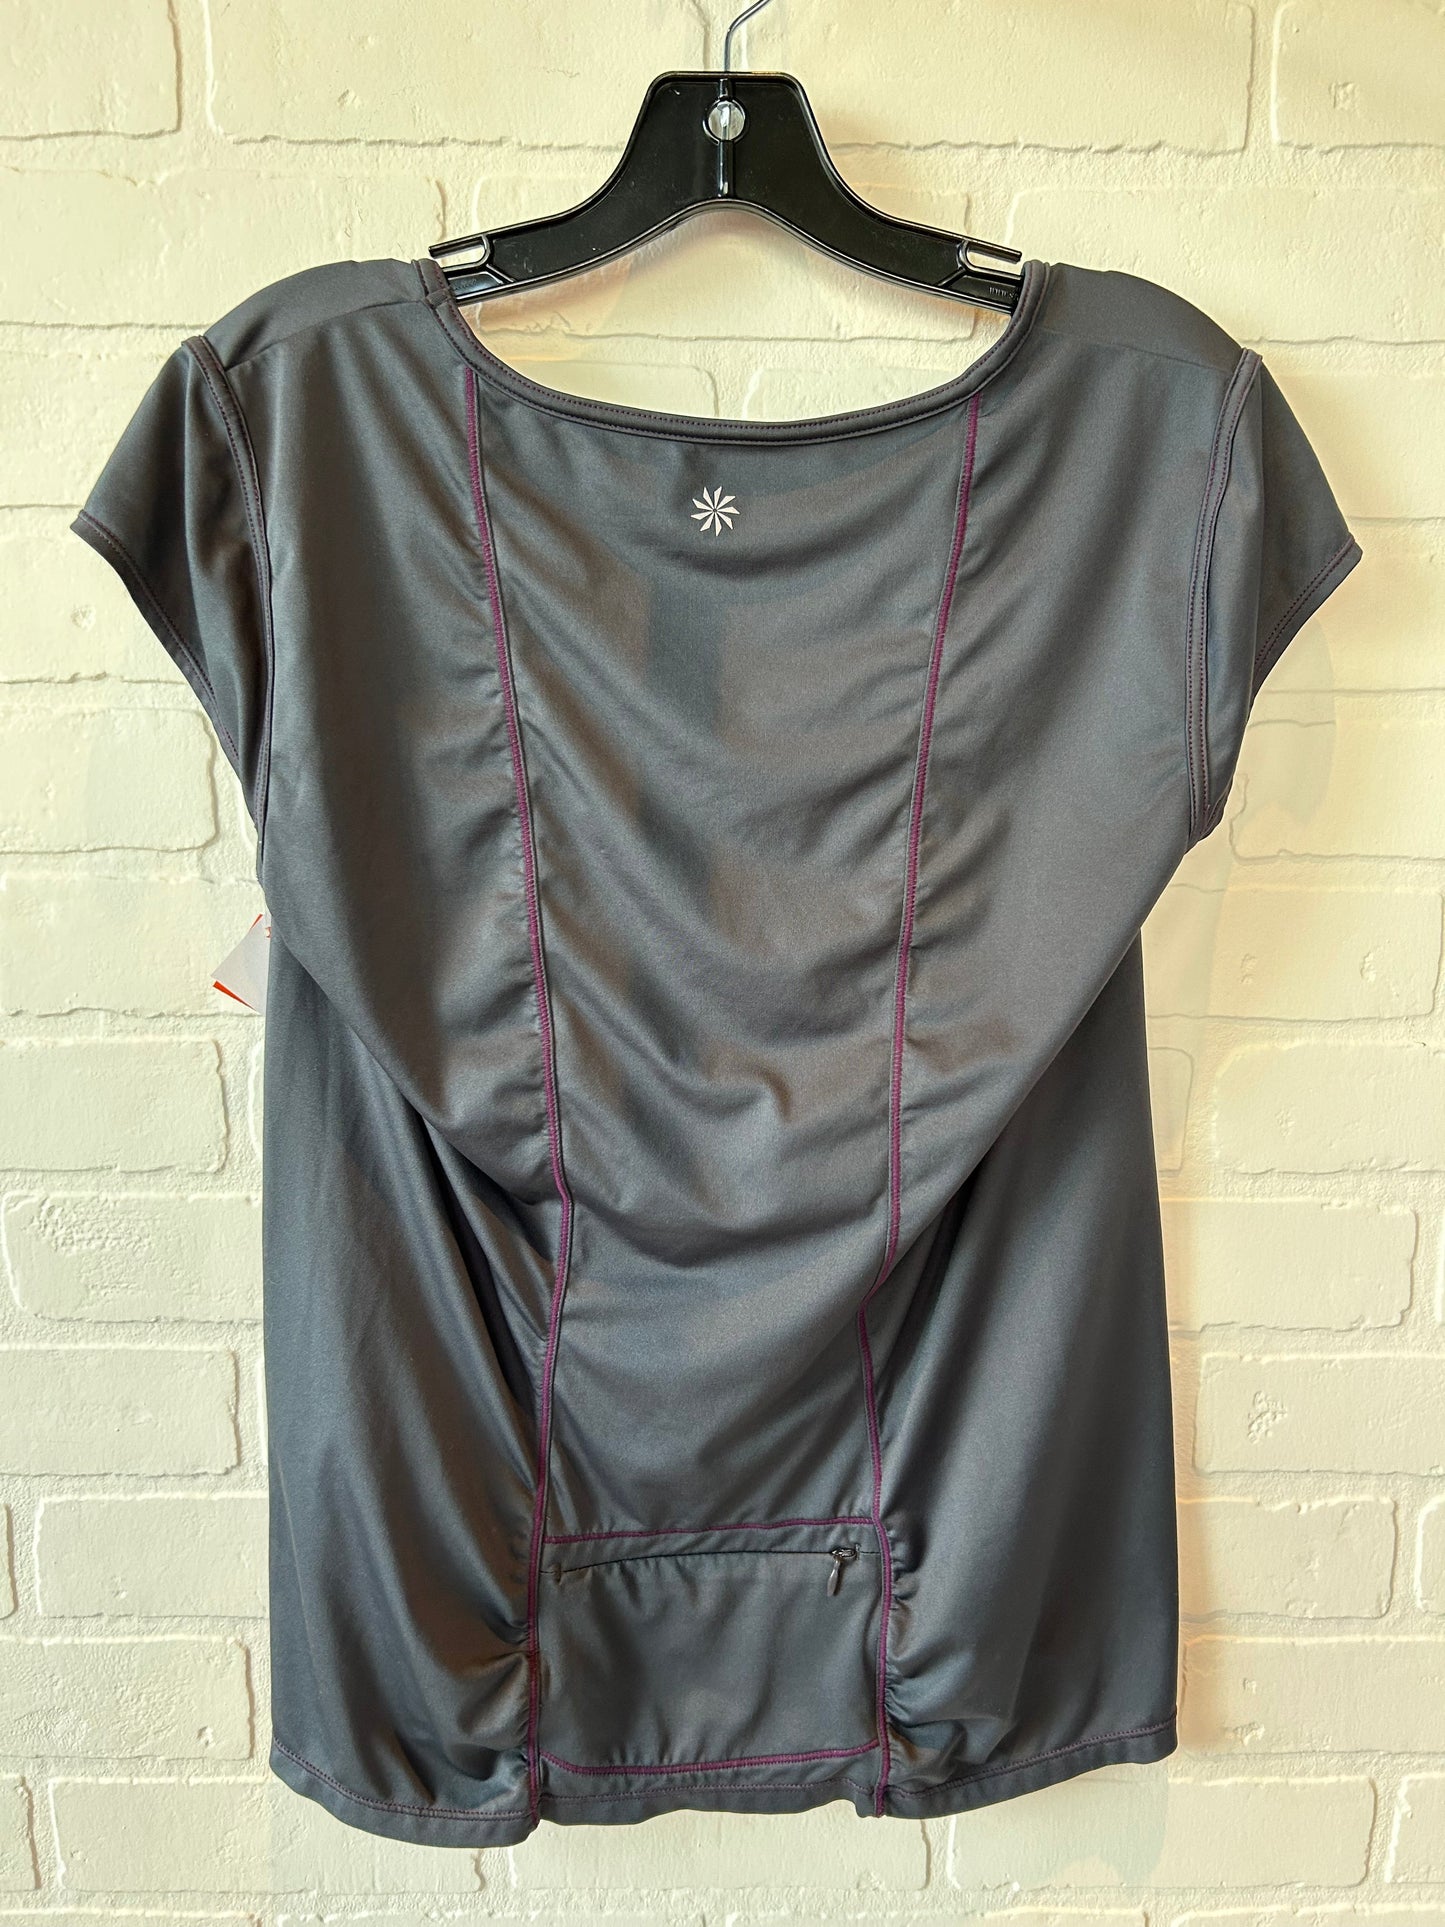 Athletic Top Short Sleeve By Athleta  Size: L